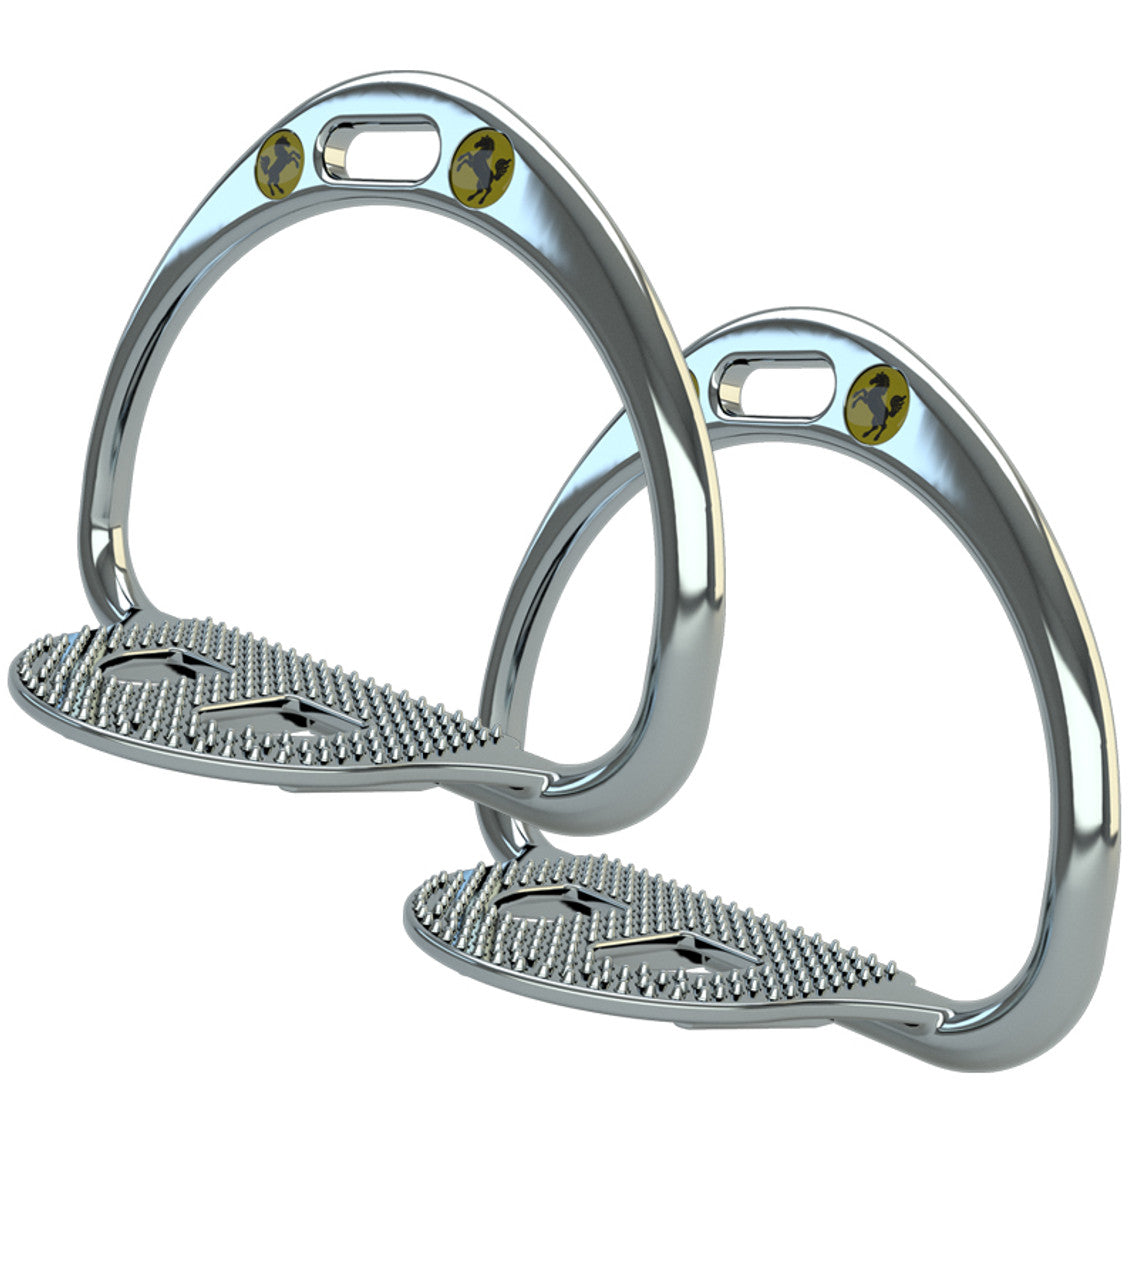 STS (Space Technology Safety) Race Stirrups Irons 95gm